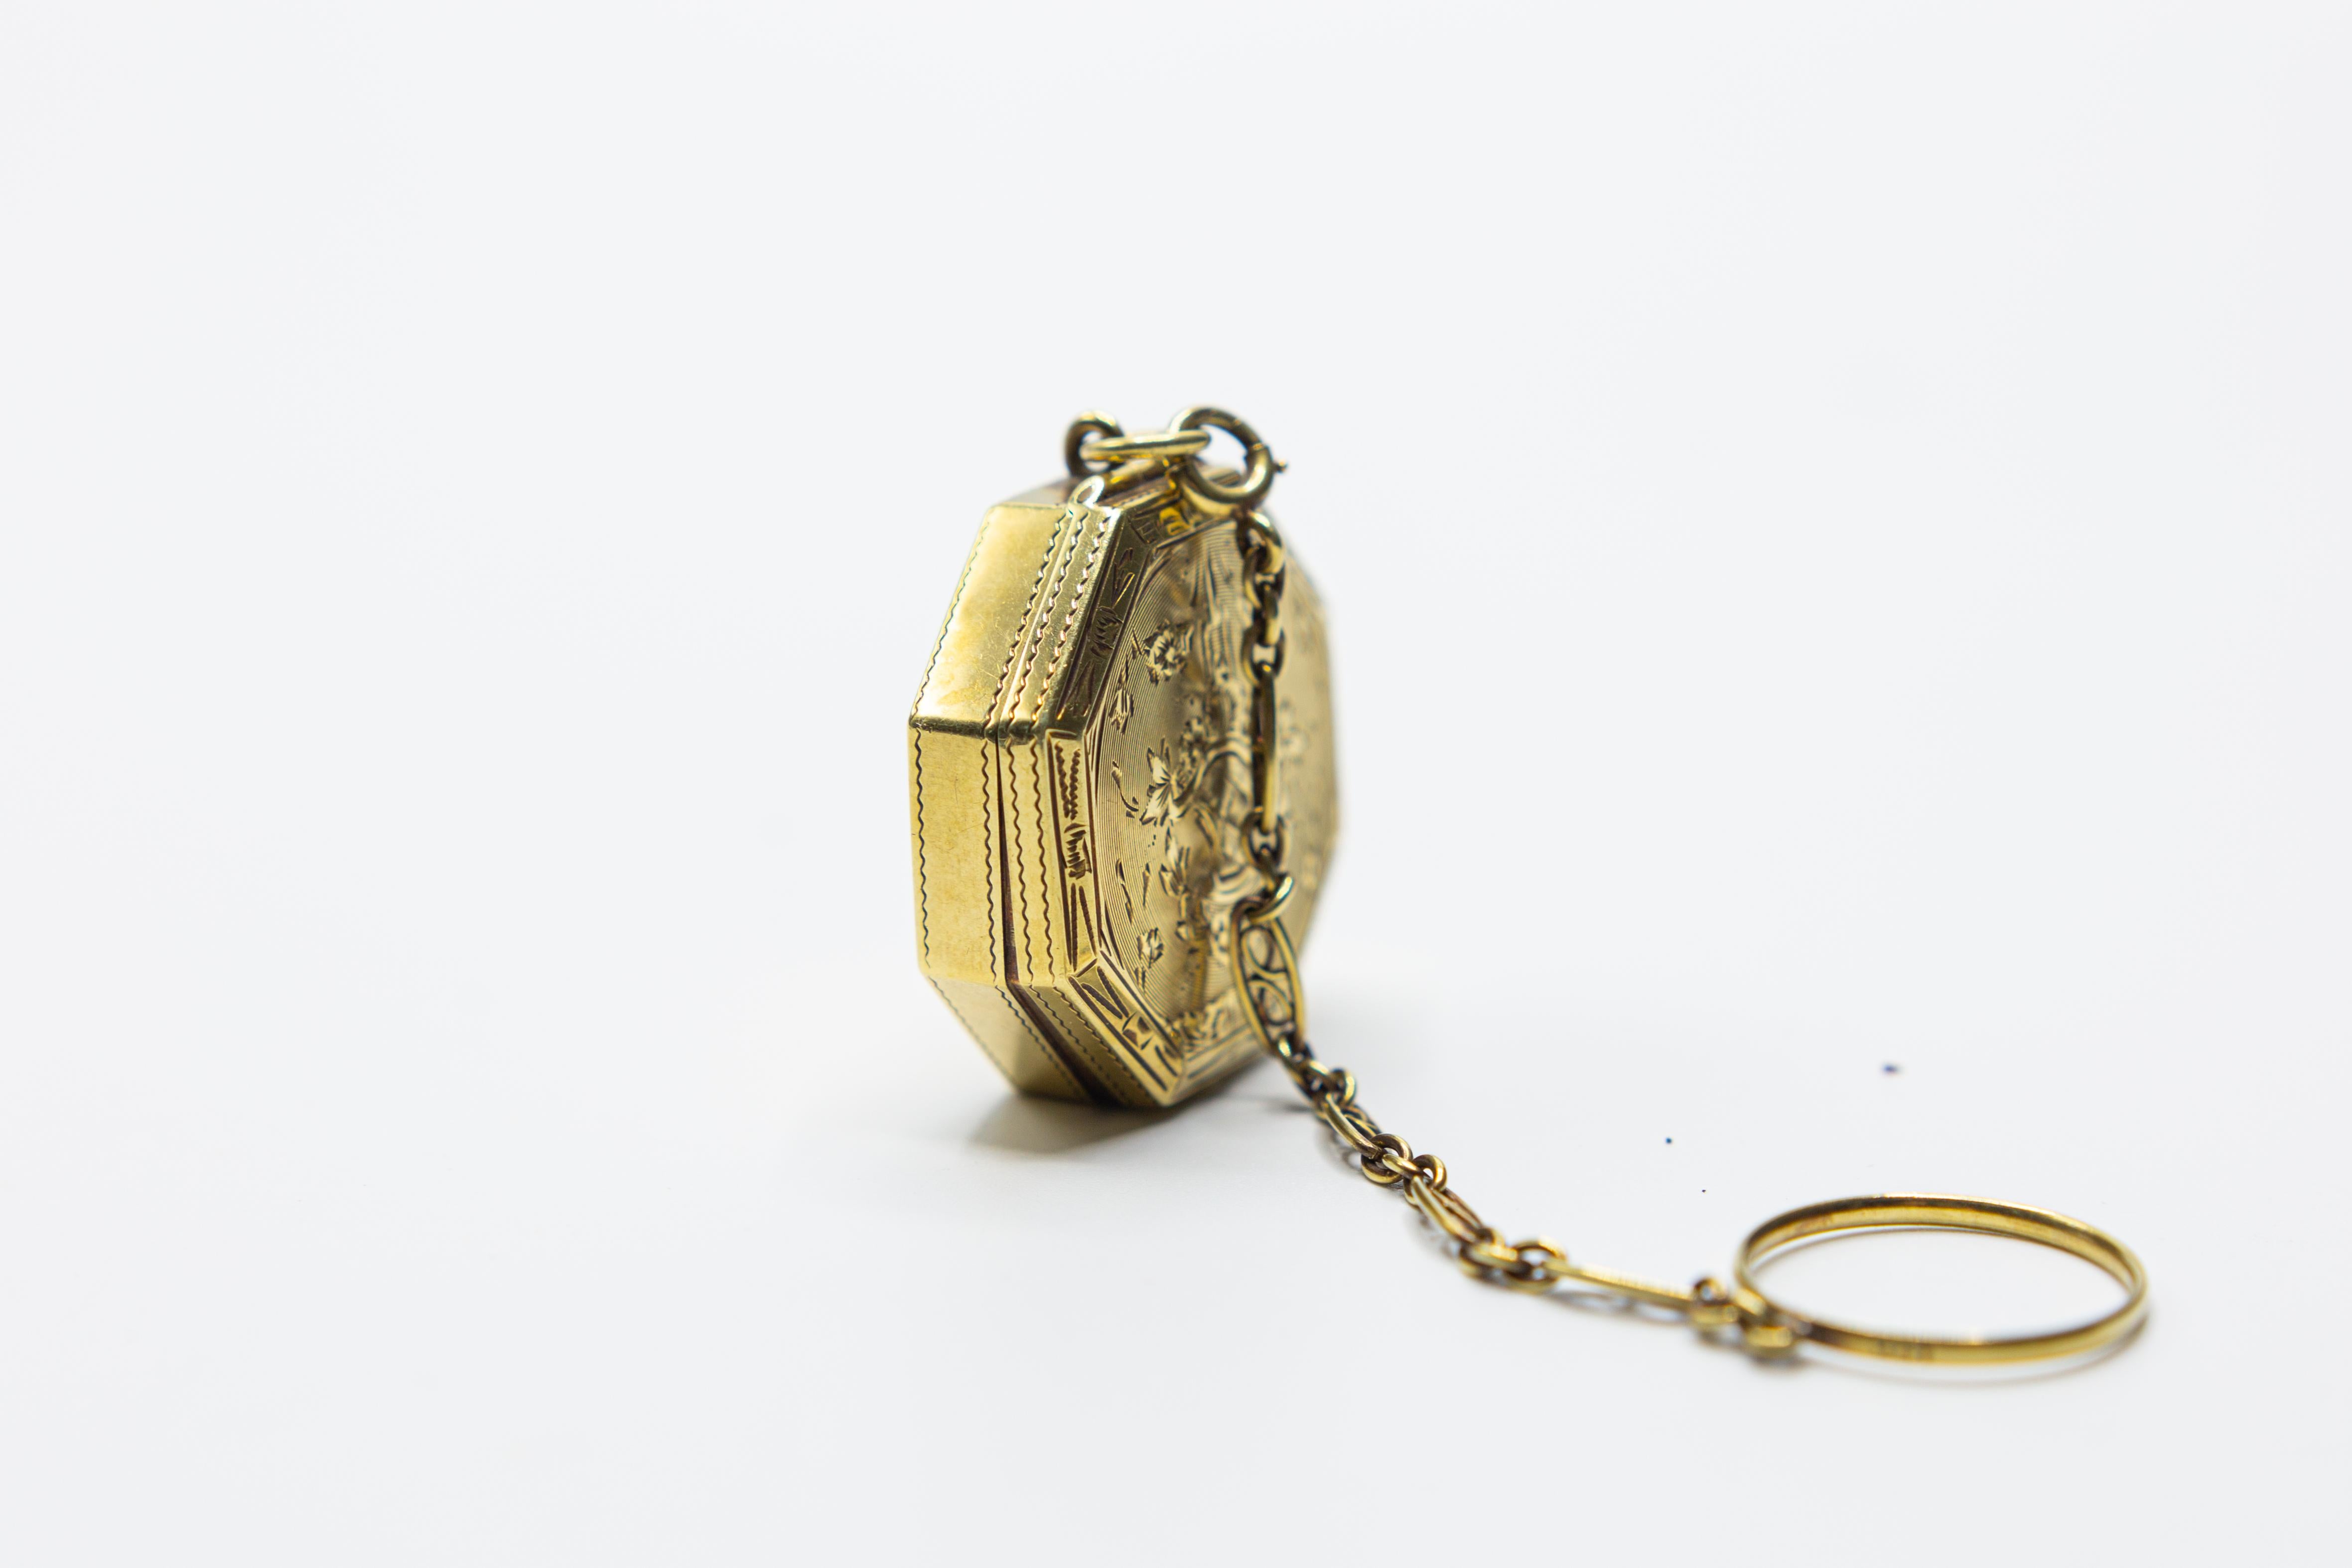 Antique Gold Pill Box/Powder Box Pendent Necklace In Good Condition For Sale In Houston, TX